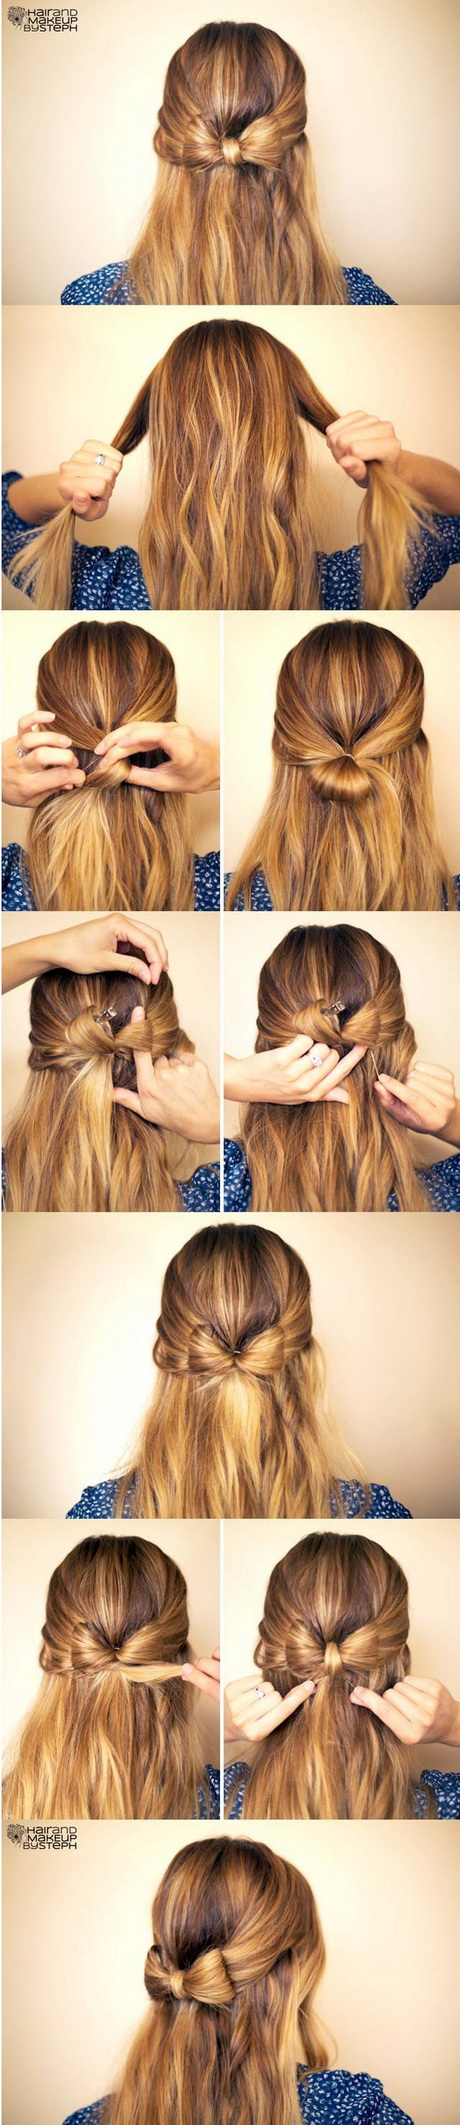 Easy quick hairstyles long hair easy-quick-hairstyles-long-hair-94-17